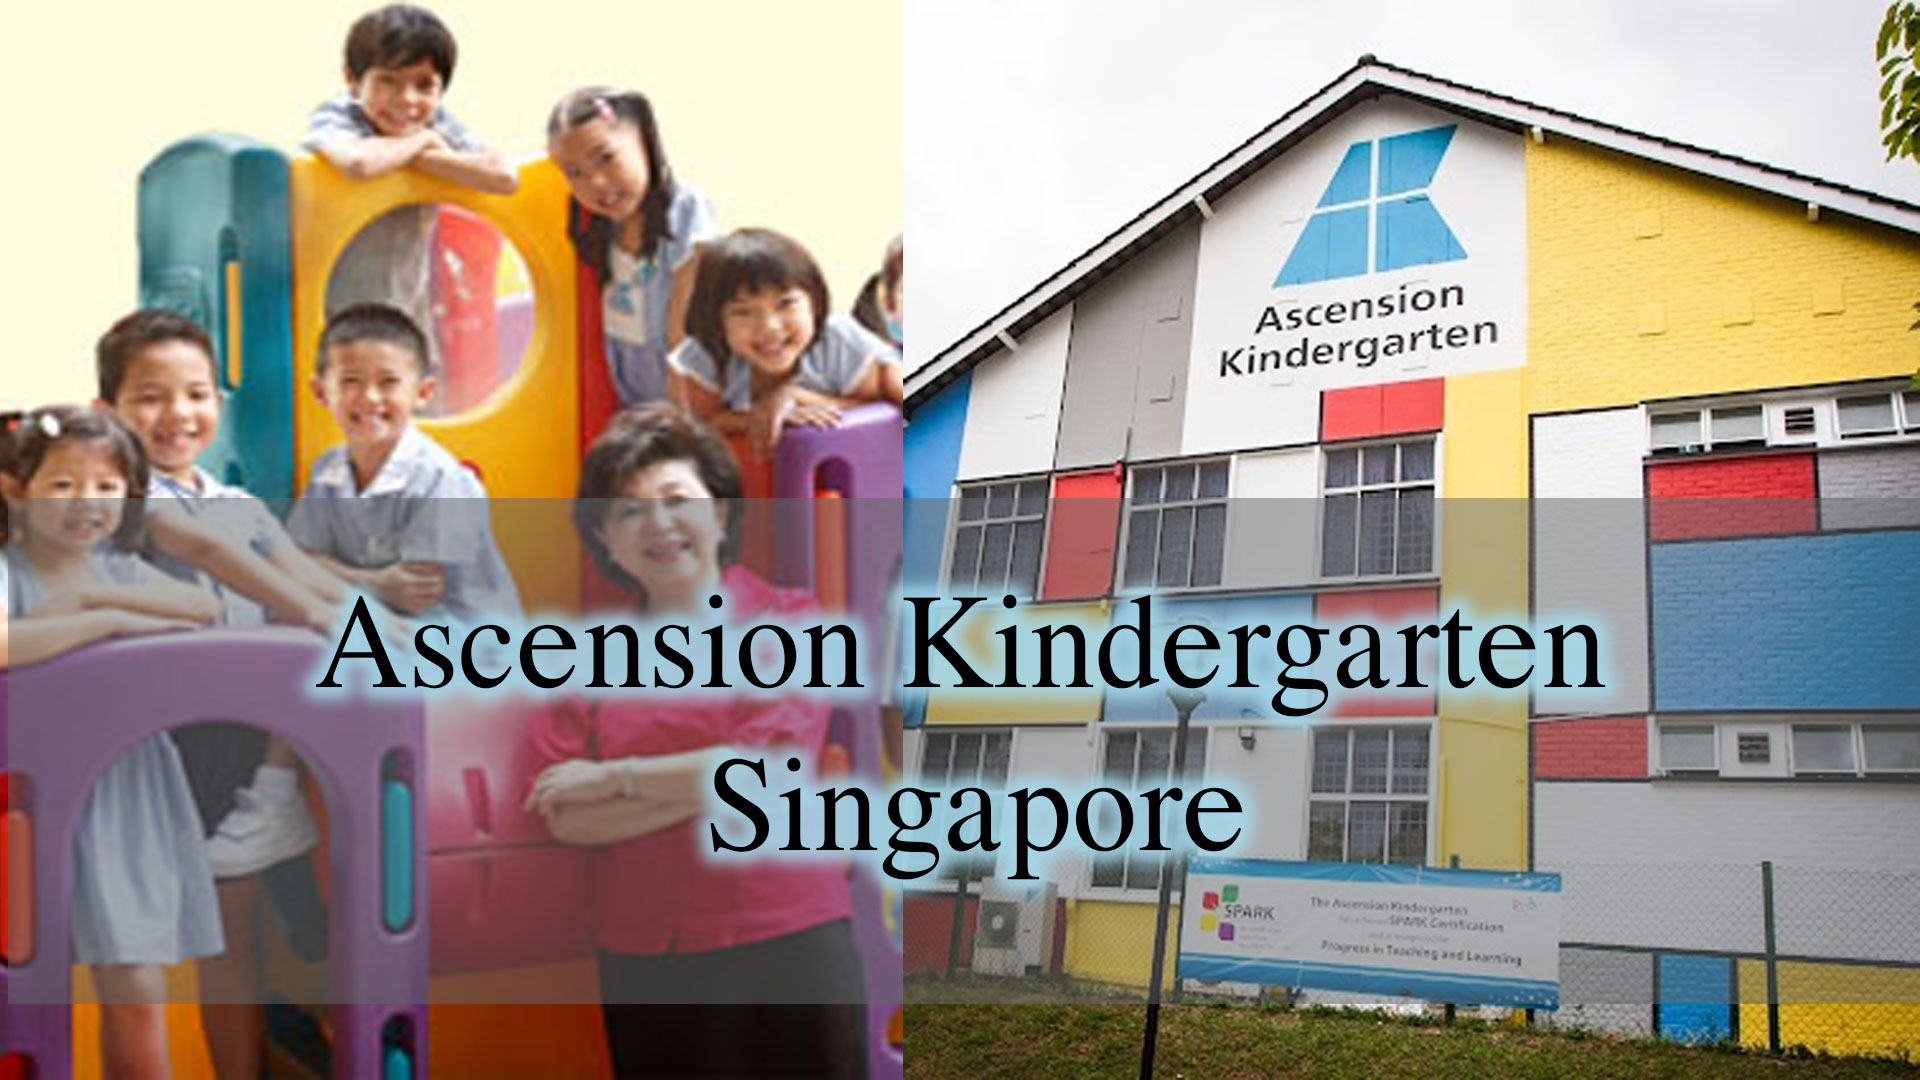 From Myra Condo to Ascension Kindergarten Singapore, it only takes about 2 min drive (550m).